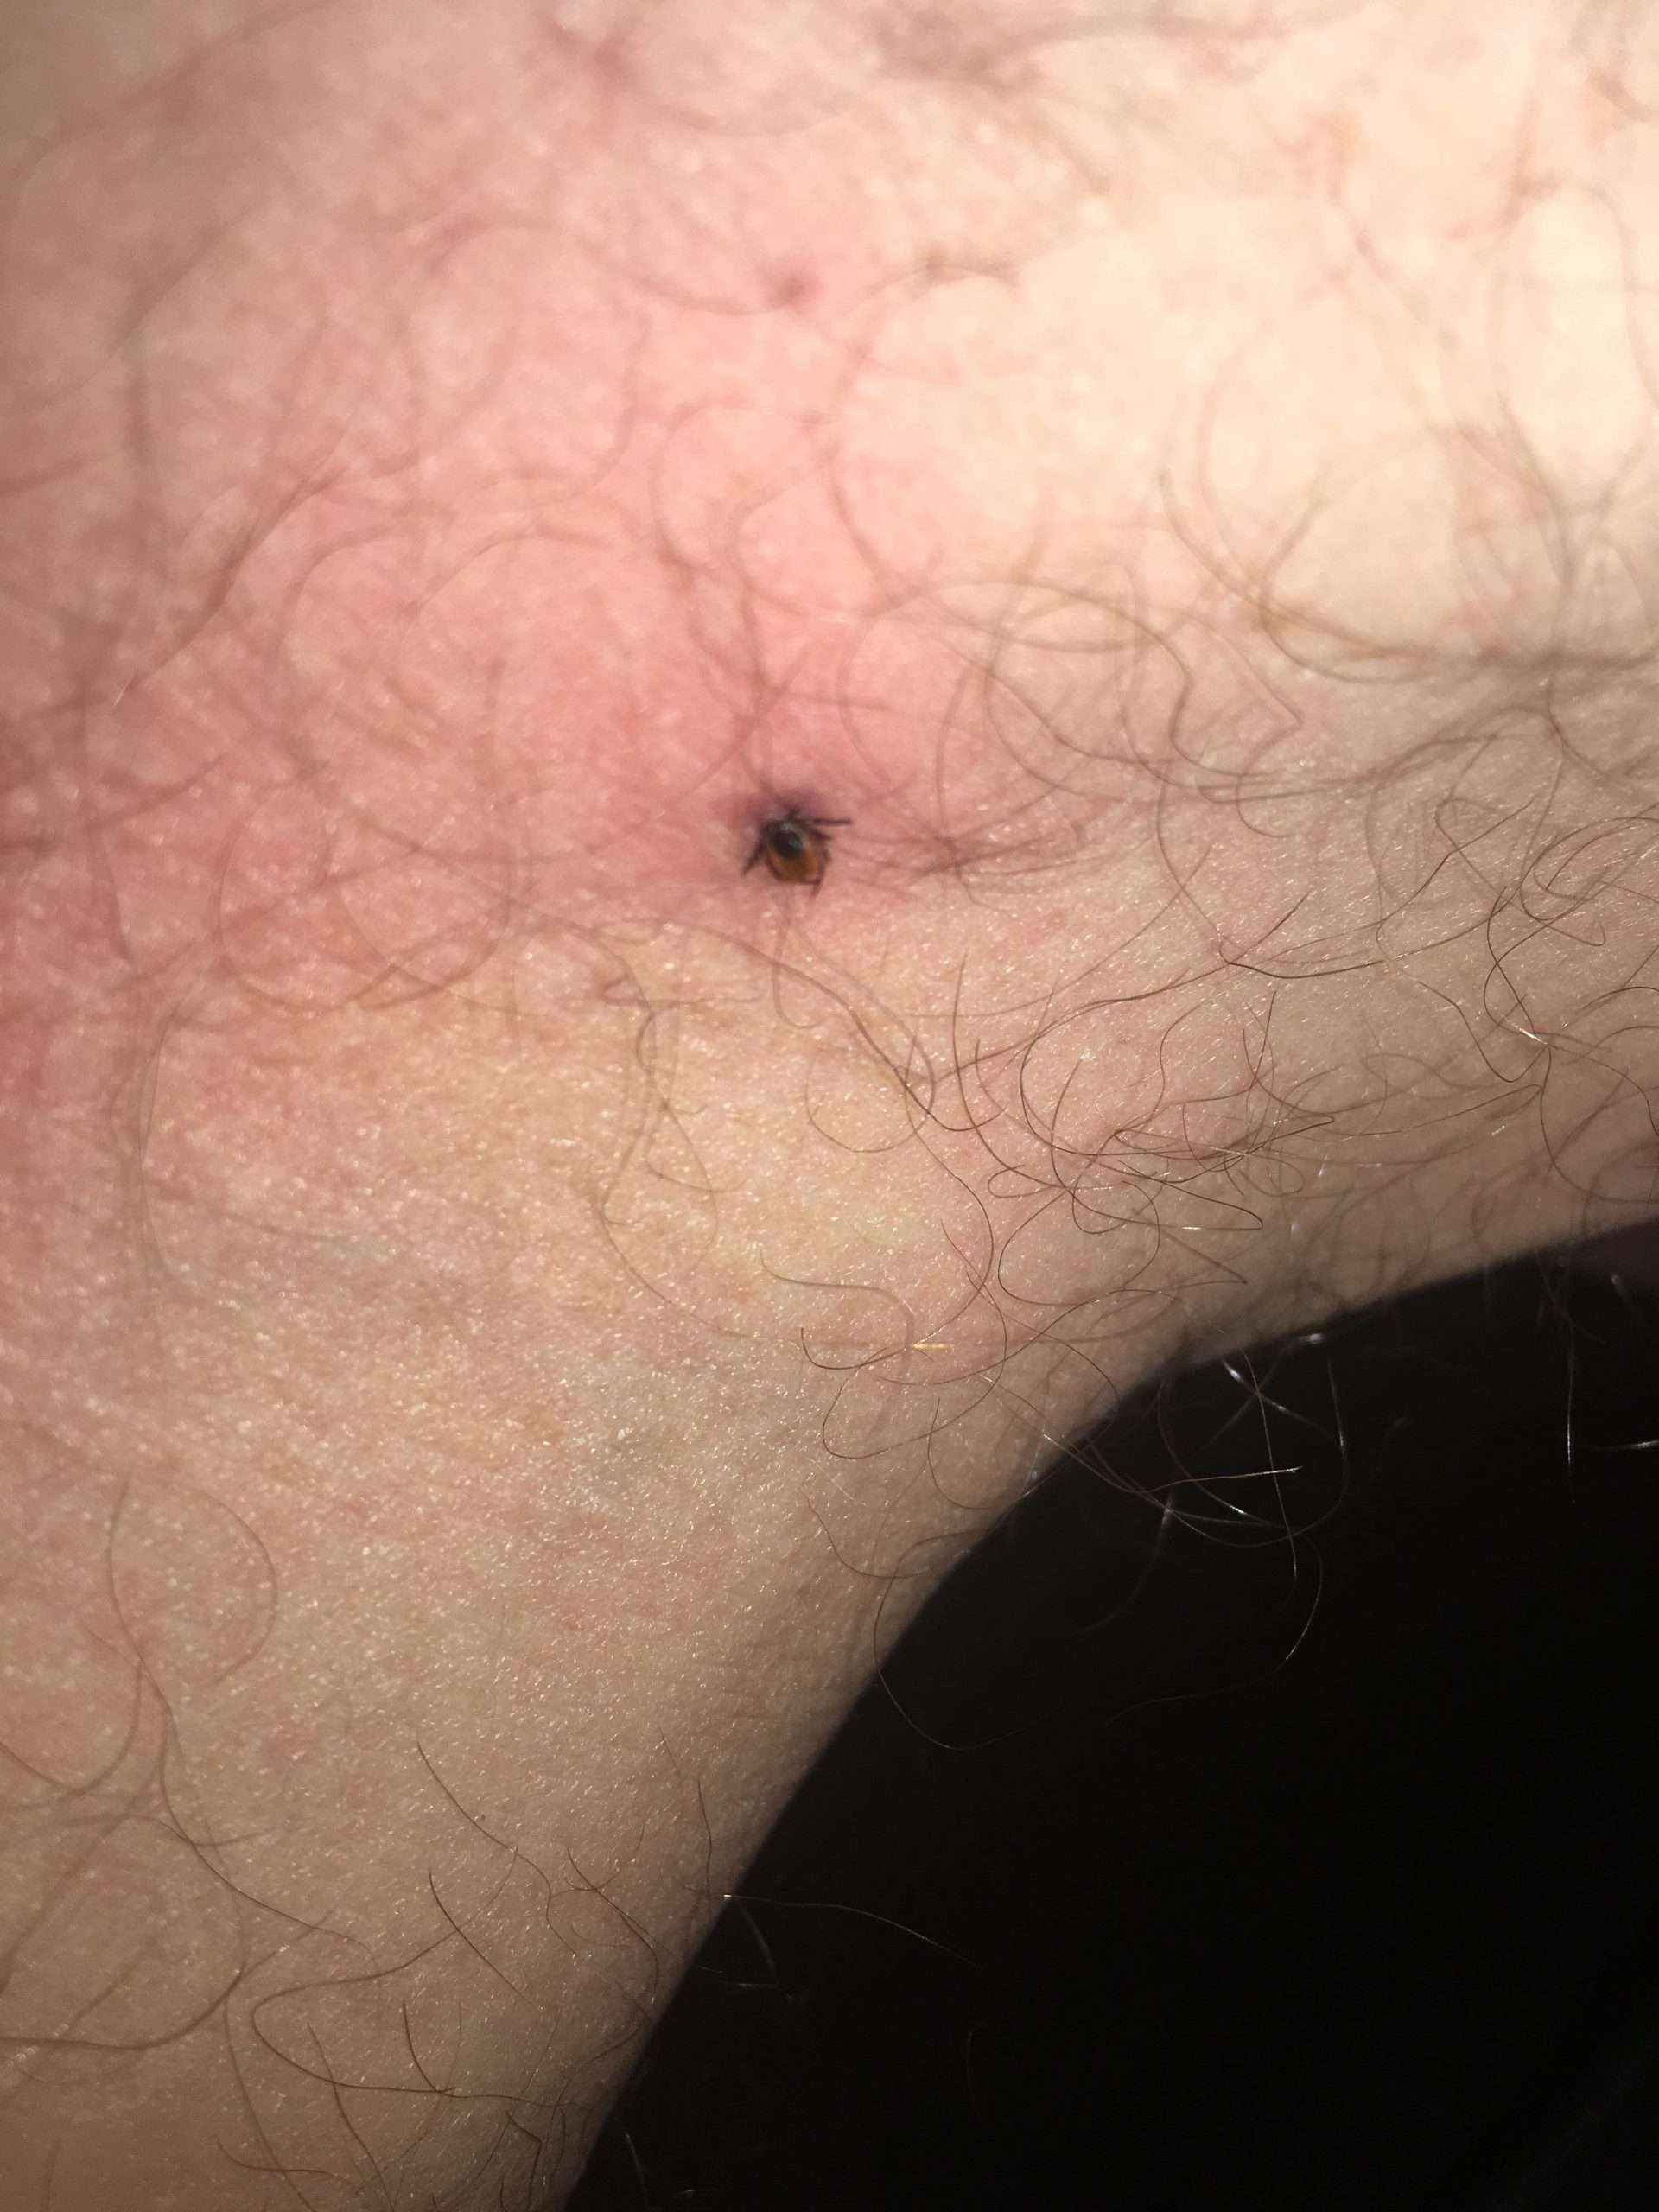 I got bit by a tick, removed it but lost the body. Can I ...